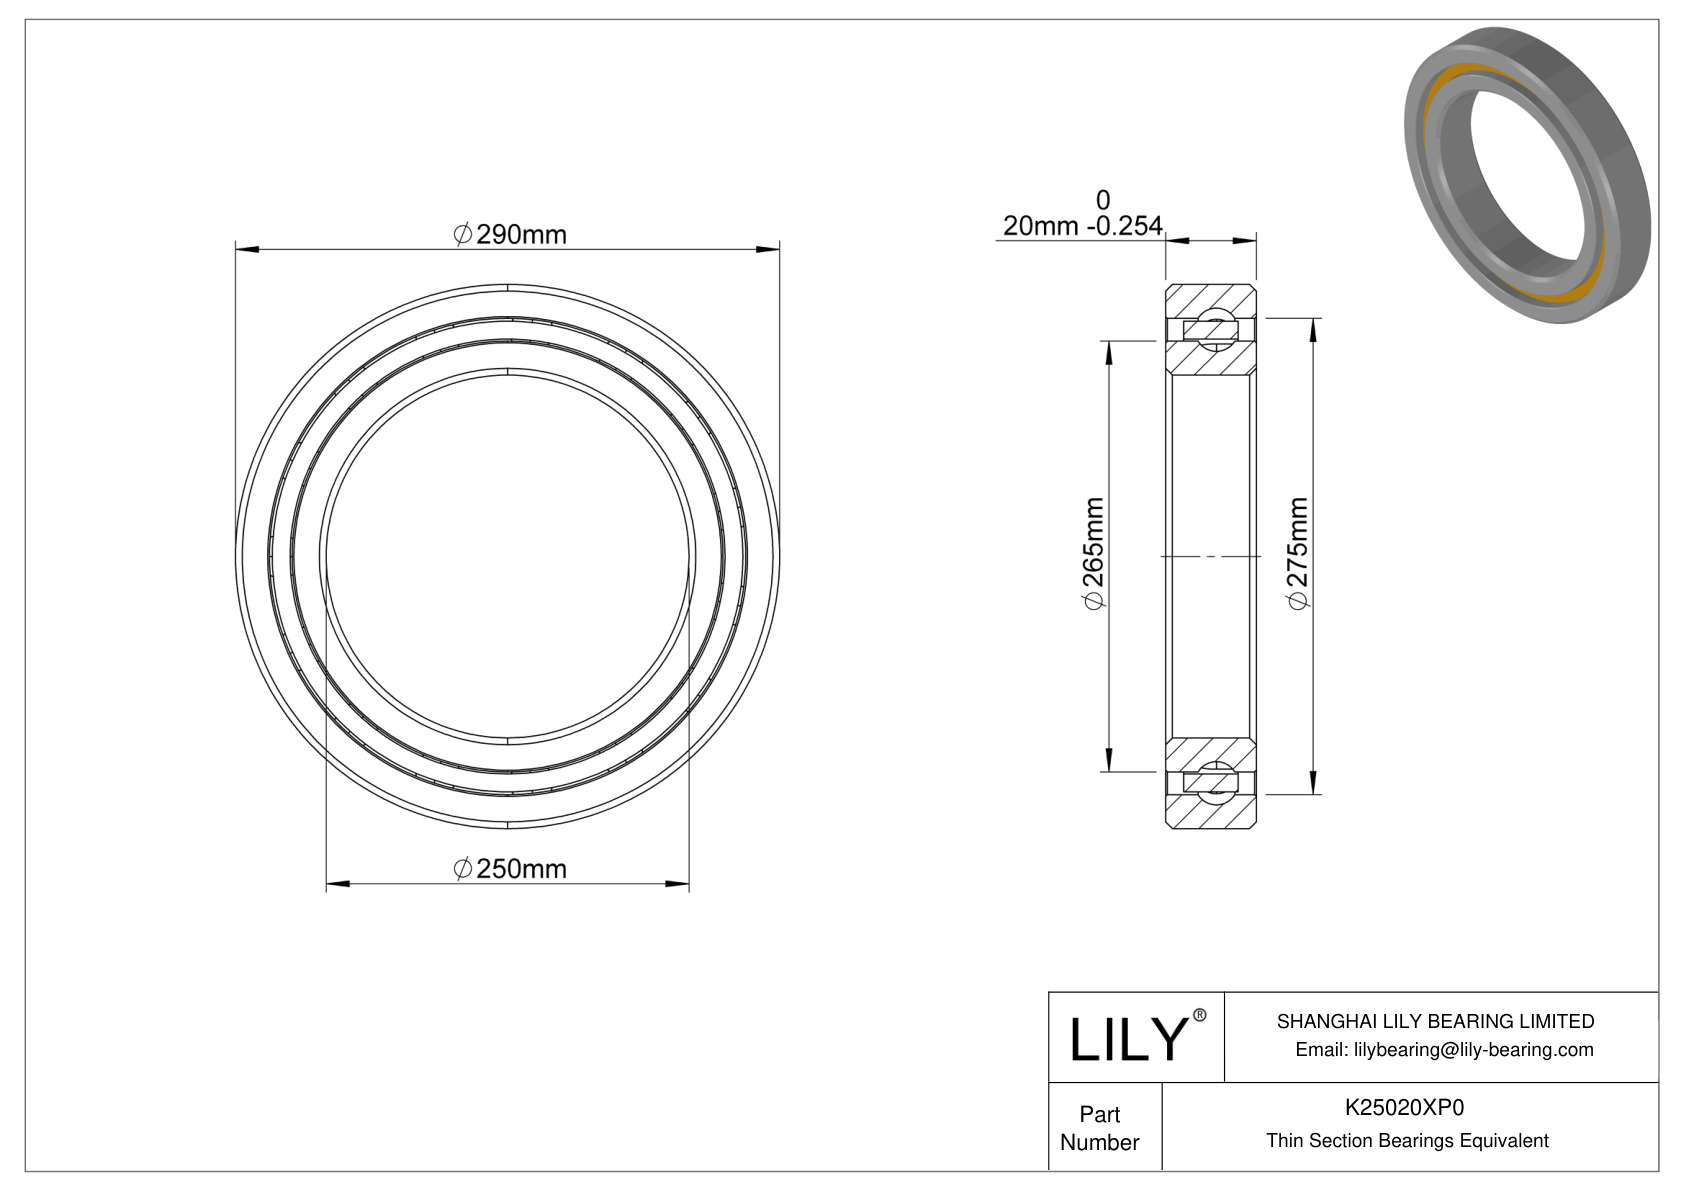 K25020XP0 Constant Section (CS) Bearings cad drawing